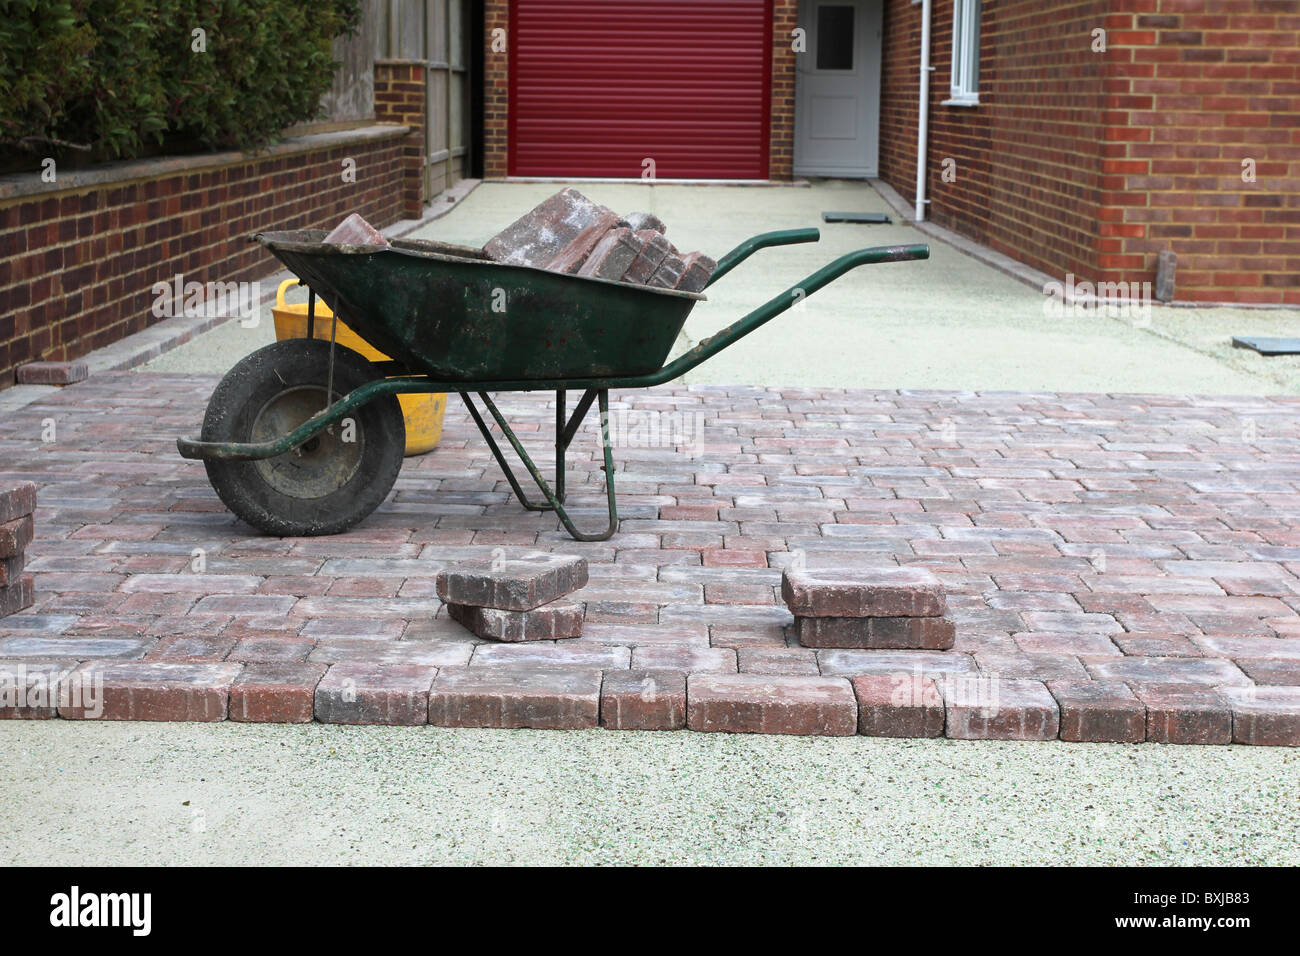 Concrete block paving bricks being laid on a driveway of a house. Stock Photo